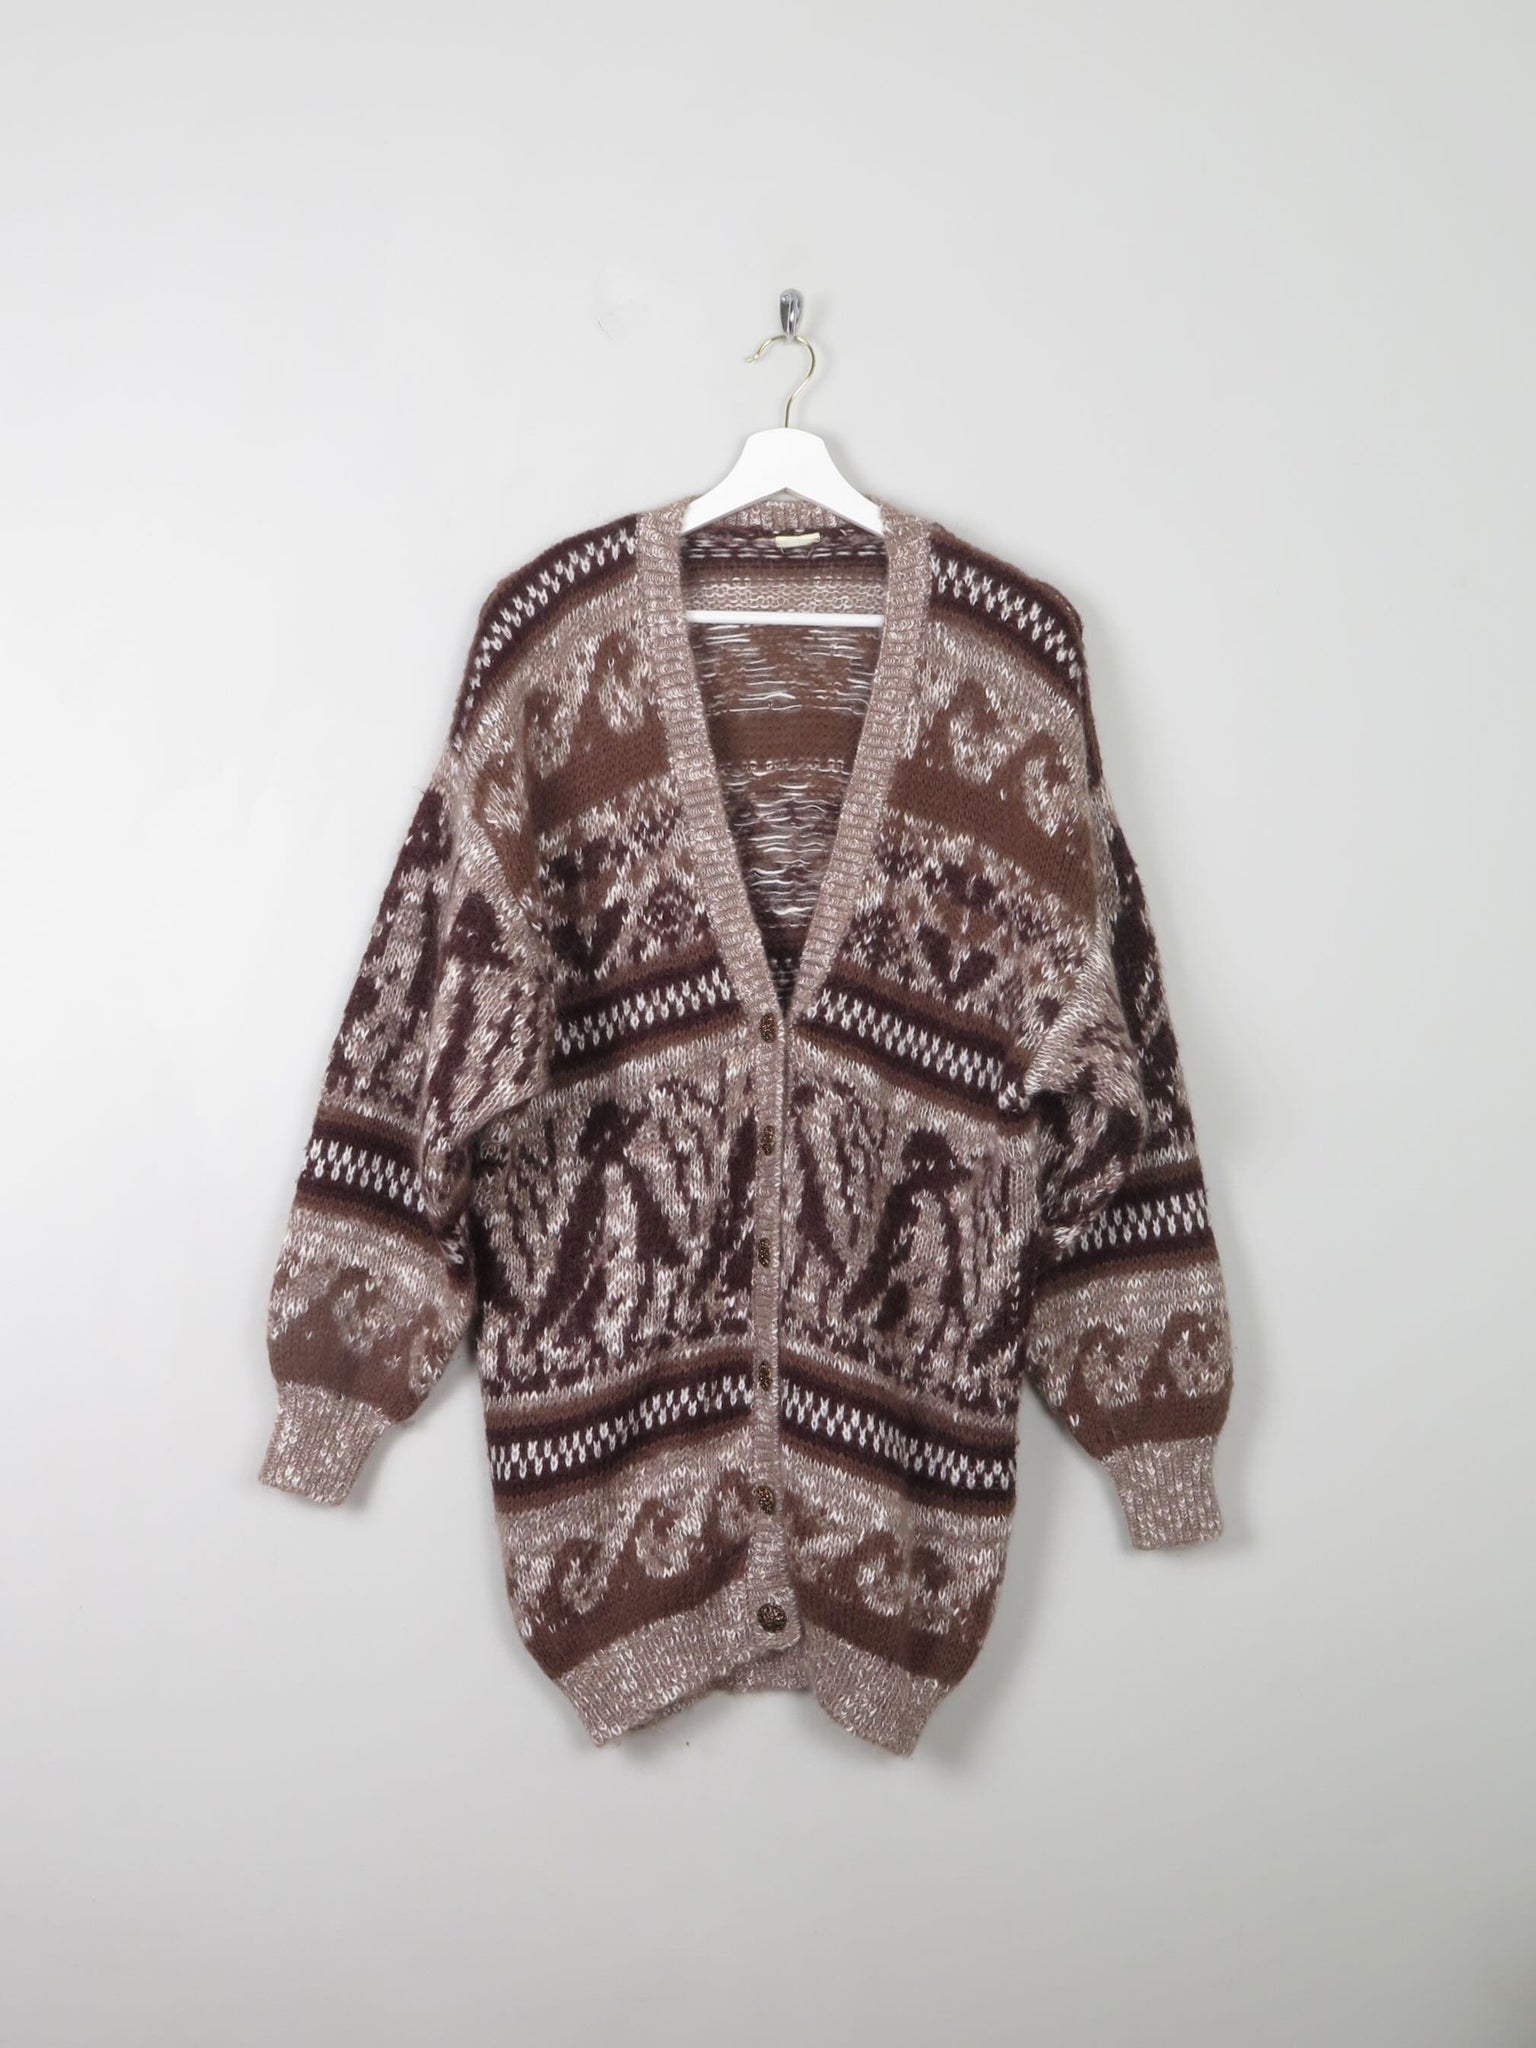 Women's Vintage Patterned Wool Cardigan S-L - The Harlequin